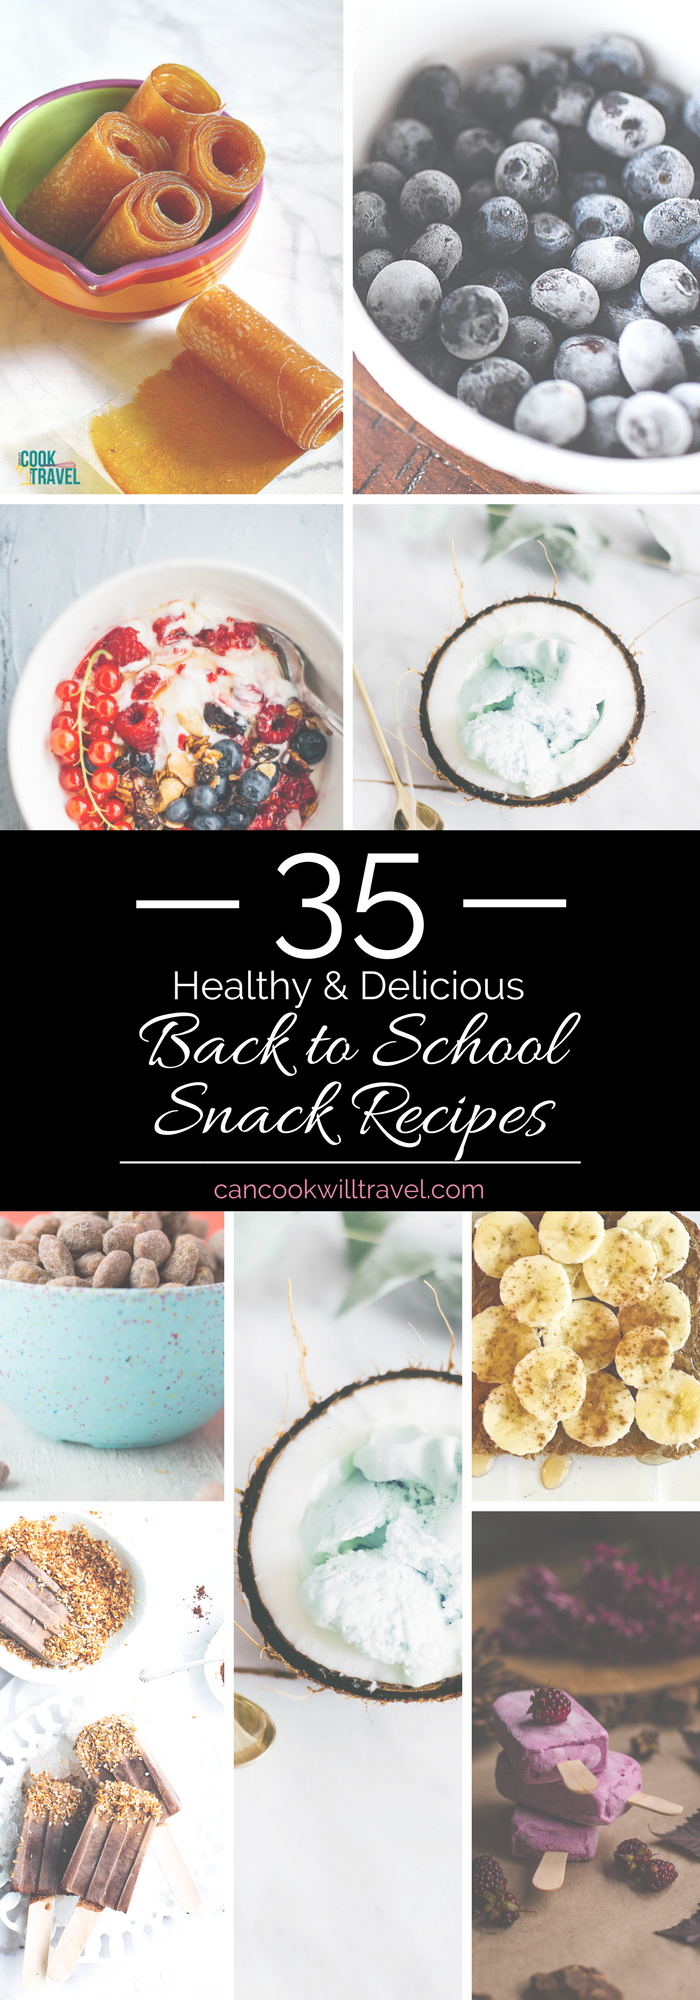 Back to School Snack Recipes